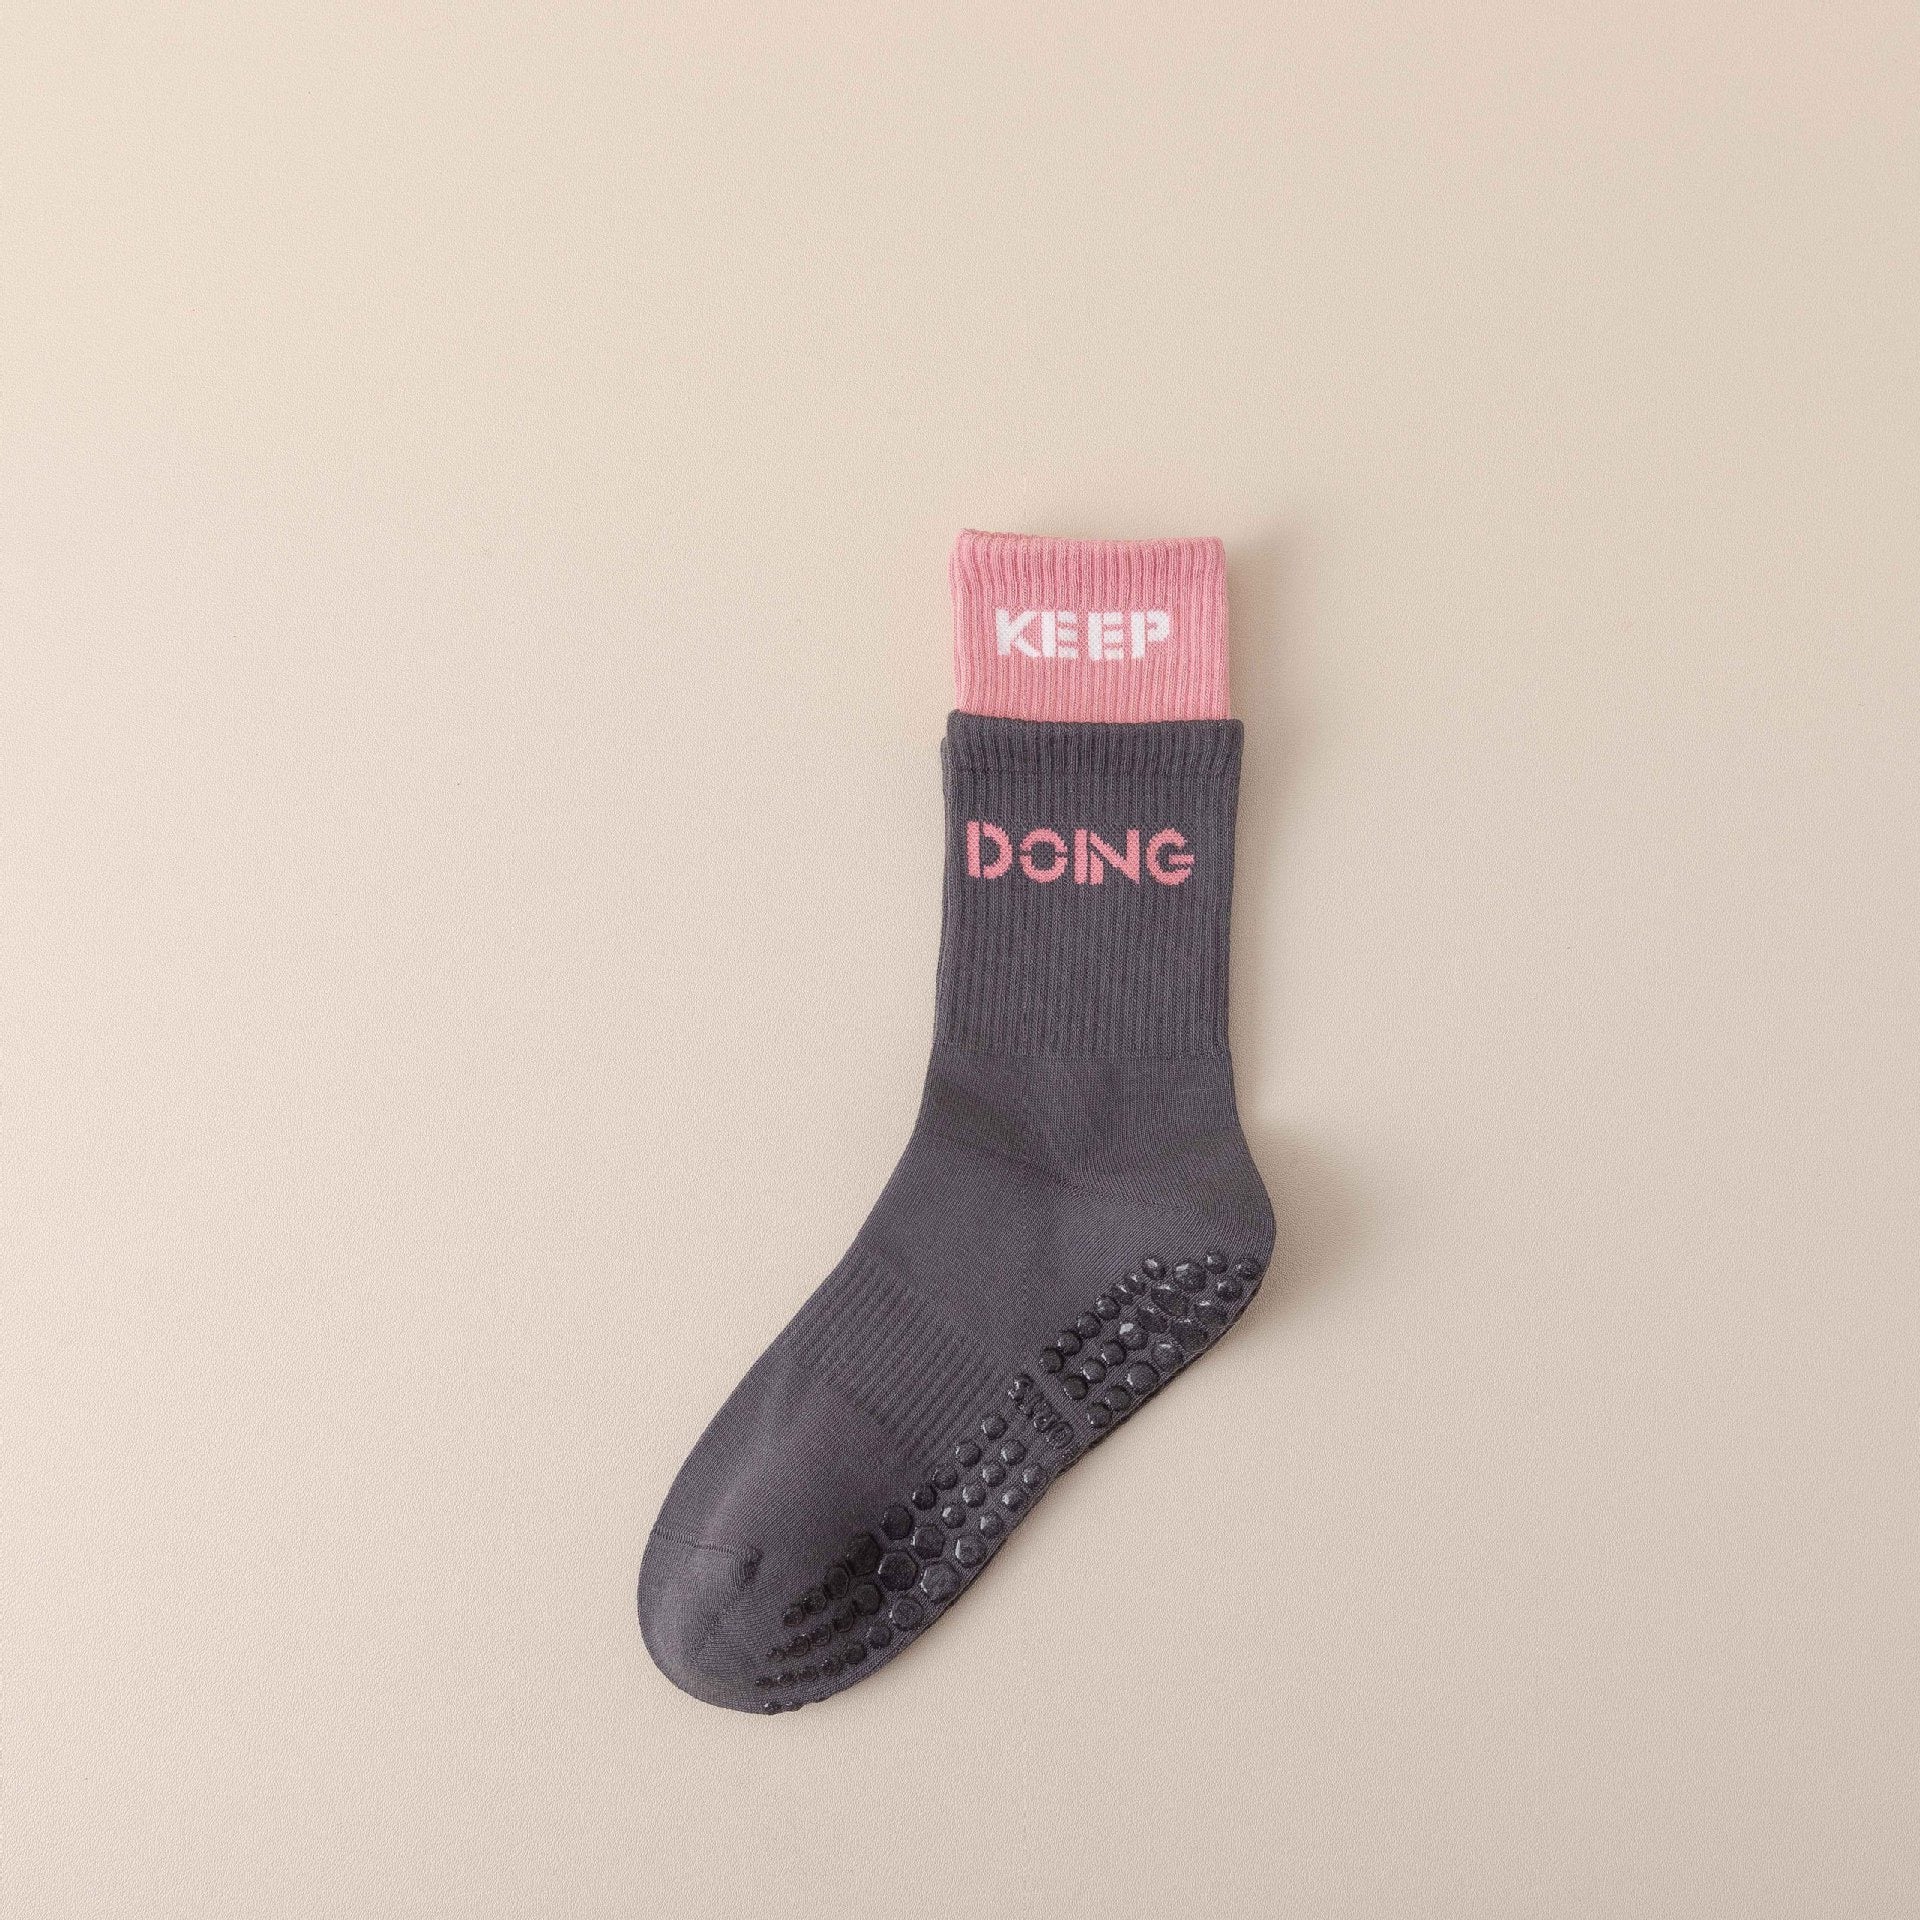 Discover pilate and yoga gripsocks, the essential studio accessory with an elegant twist. Perfect for Fitness, gym, workout, studio, wall pilate, and barre.